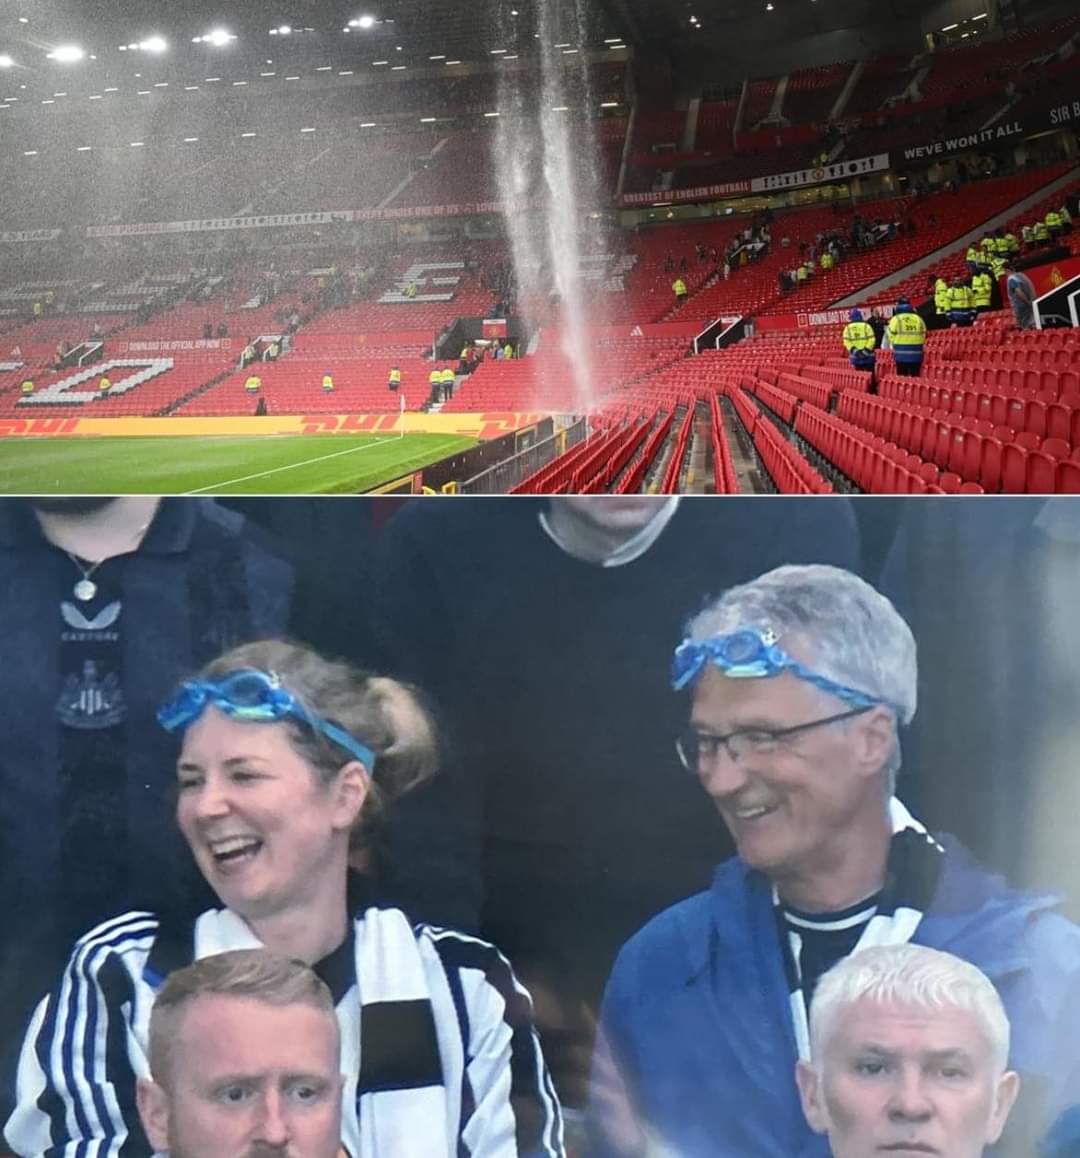 Newcastle fans did not take any chances at Old Trafford tonight 🤣🤣🤣

Theatre of Streams in all its glory! 🤣